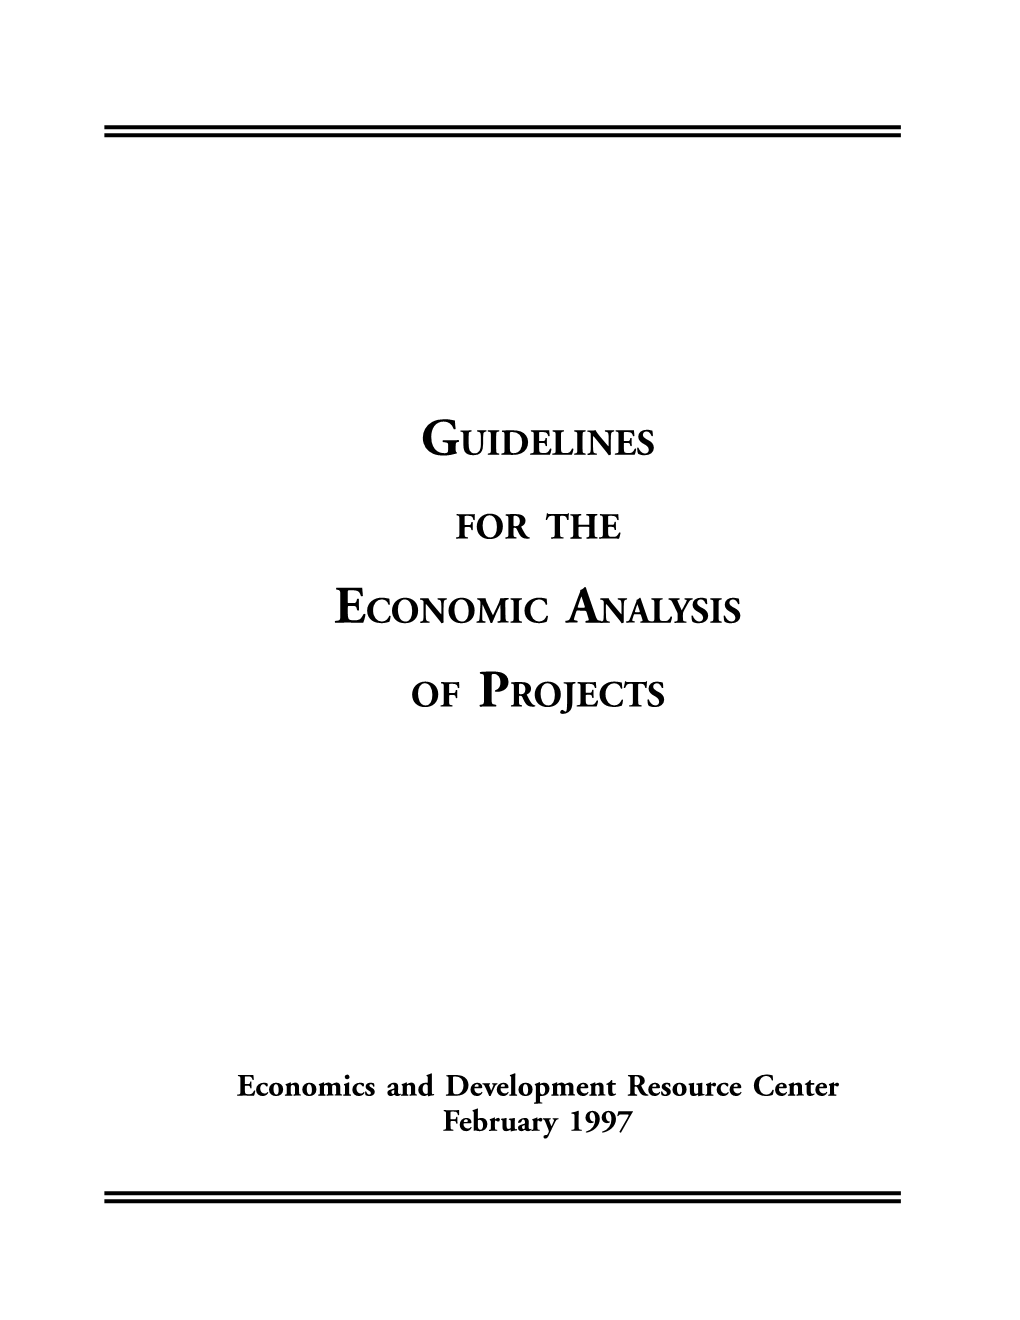 Guidelines for the Economic Analysis of Projects